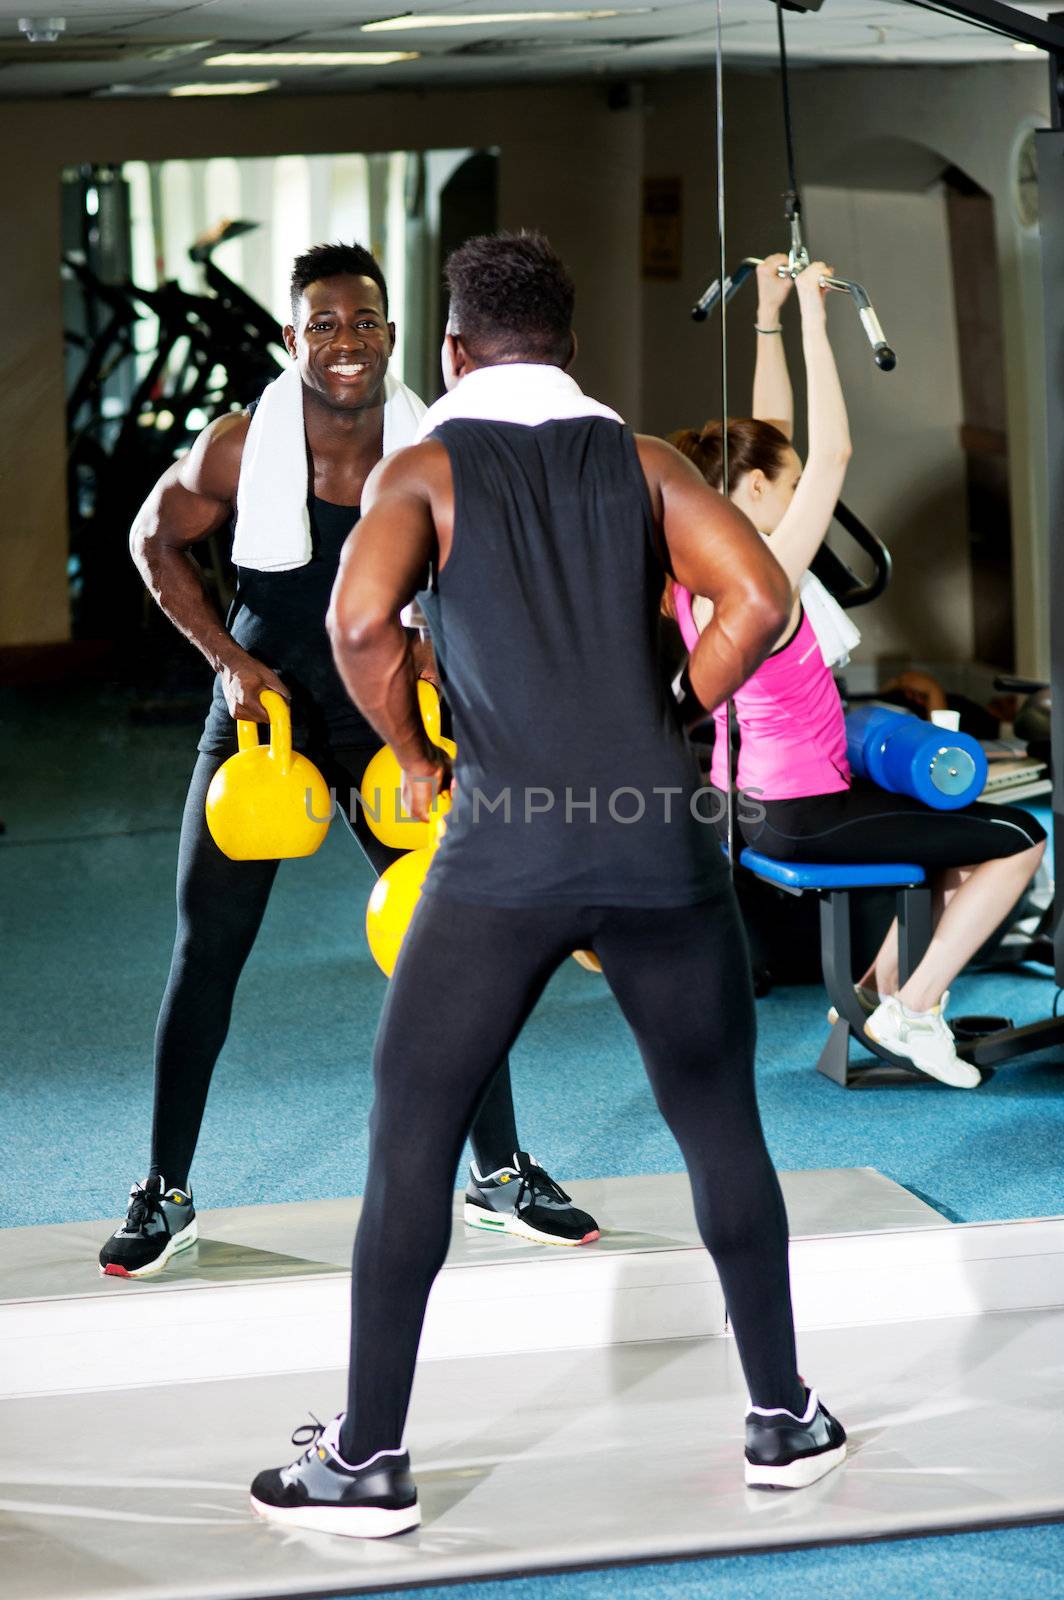 Its workout time. African male lifting heavy kettlebells while white female is working out in the multi gym